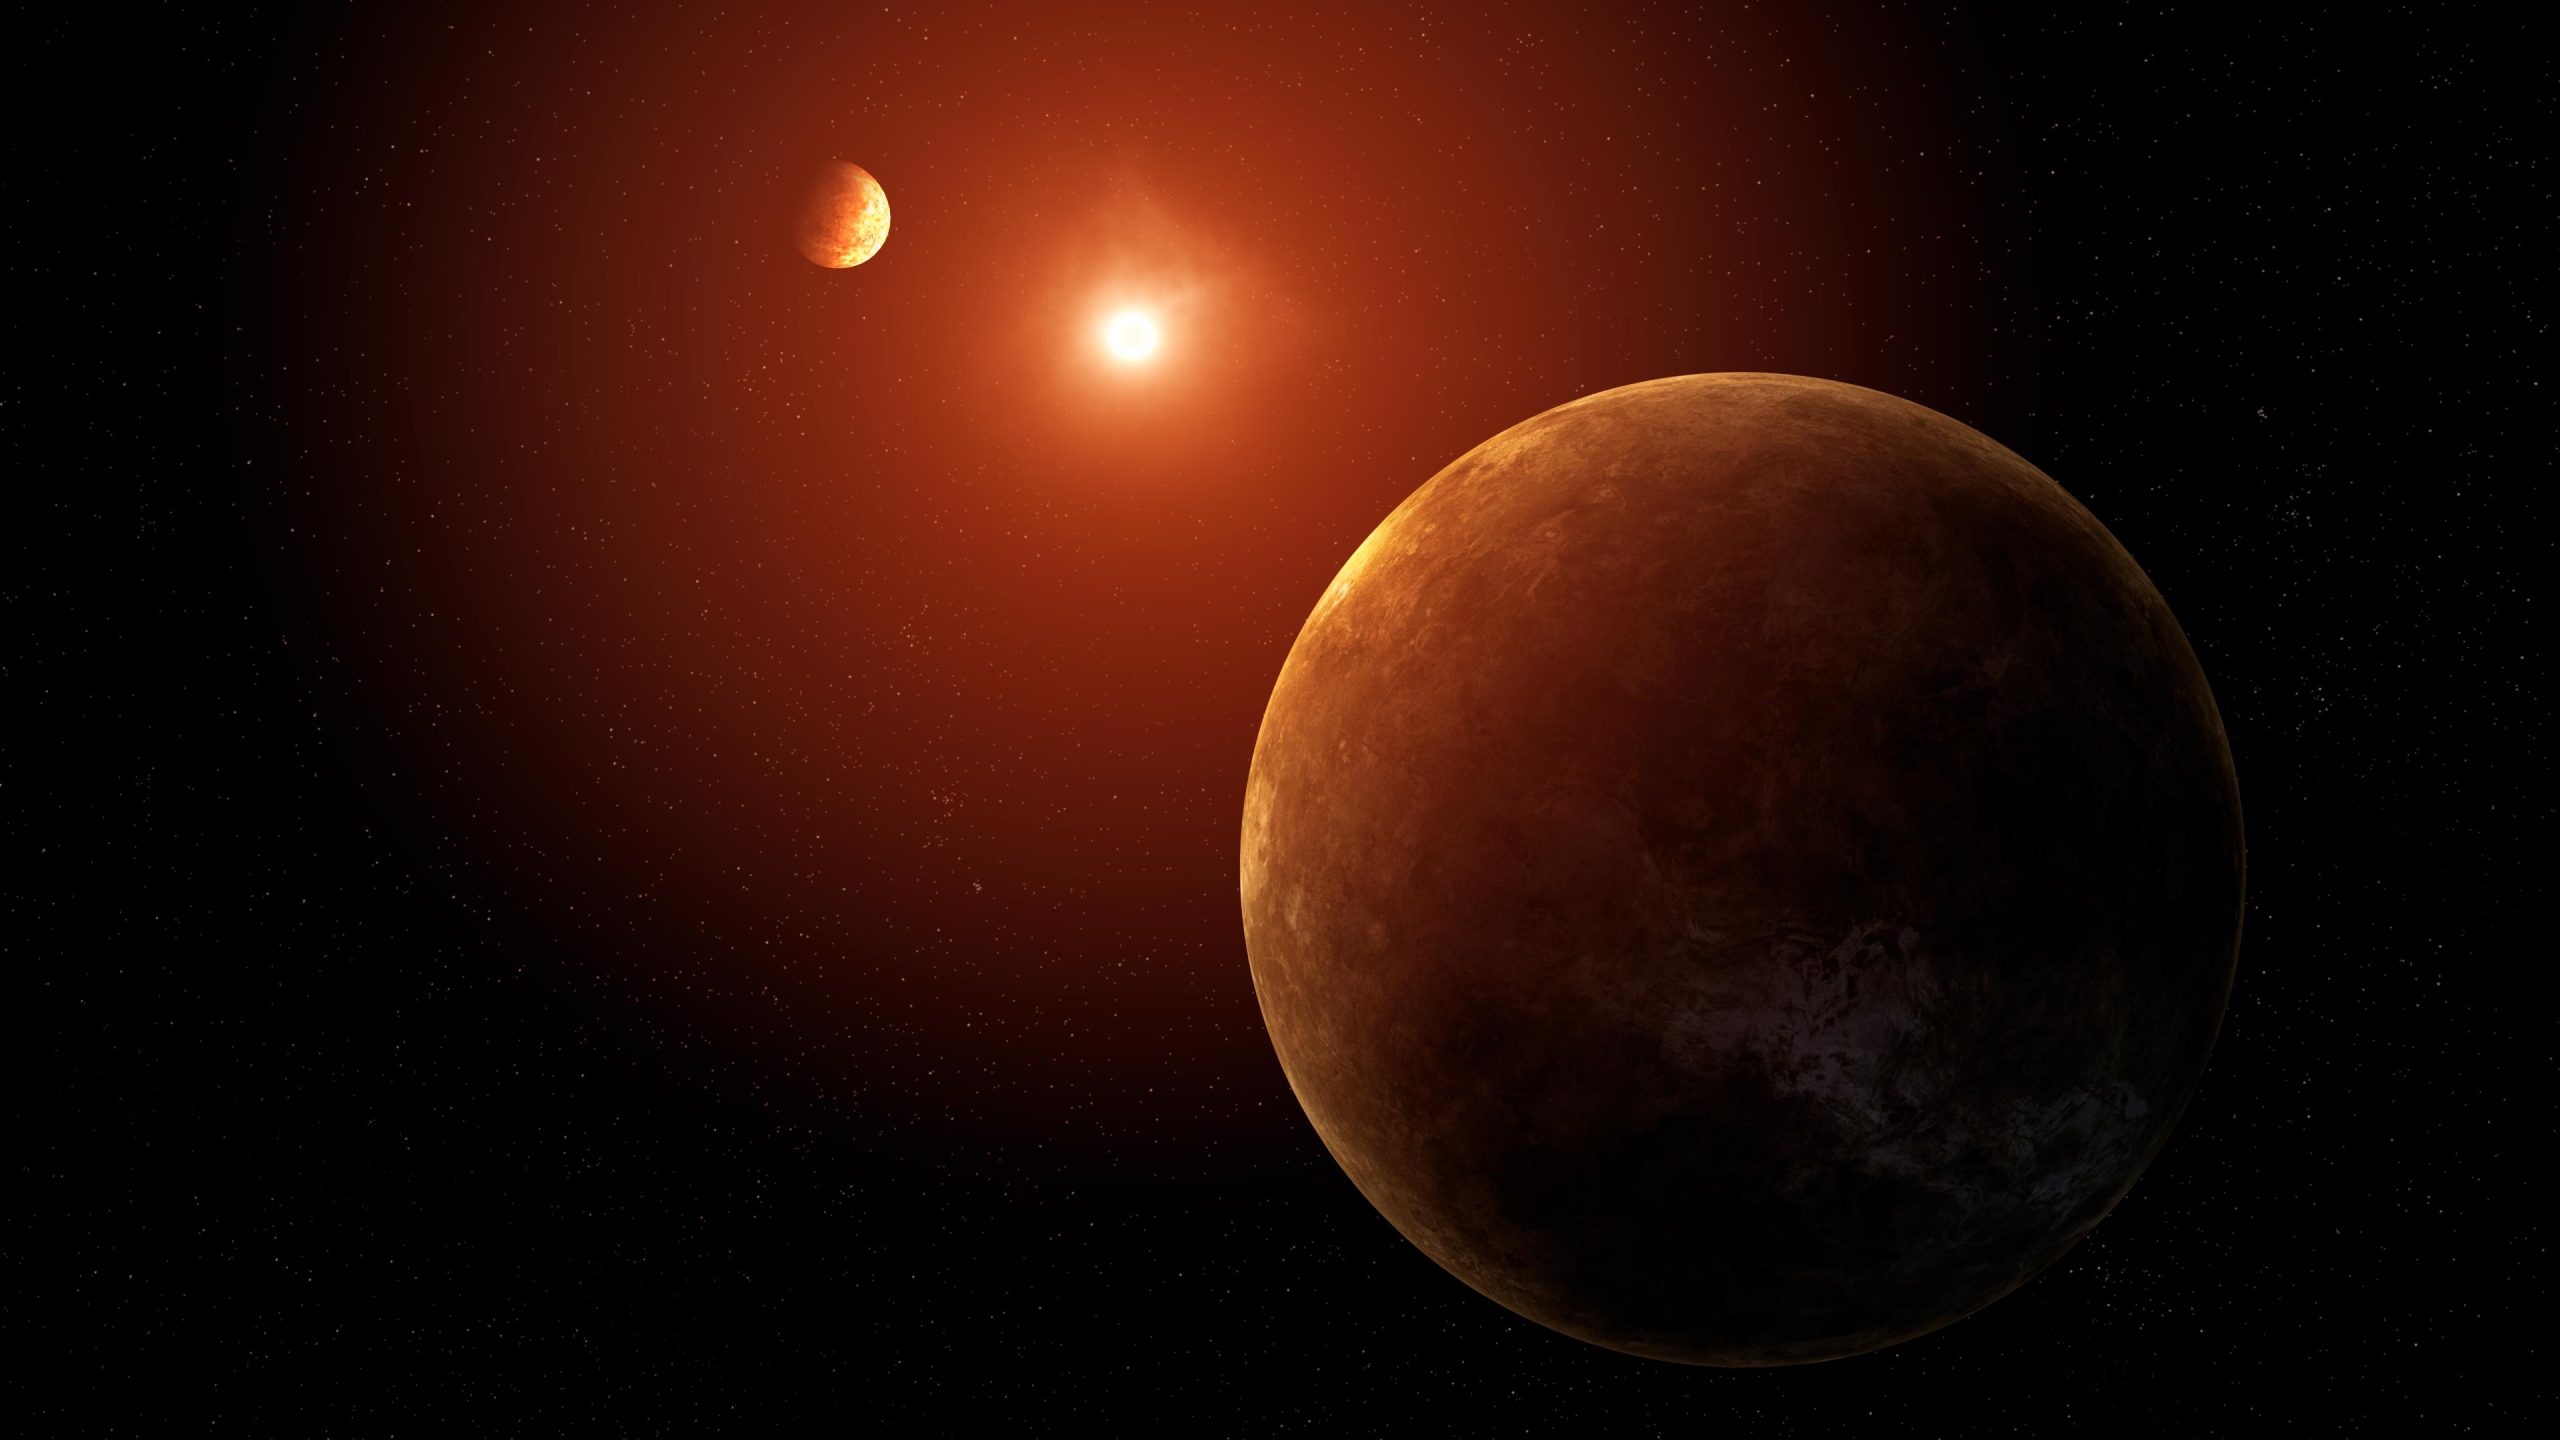 Kepler reveals an amazing system that includes seven super-Earths